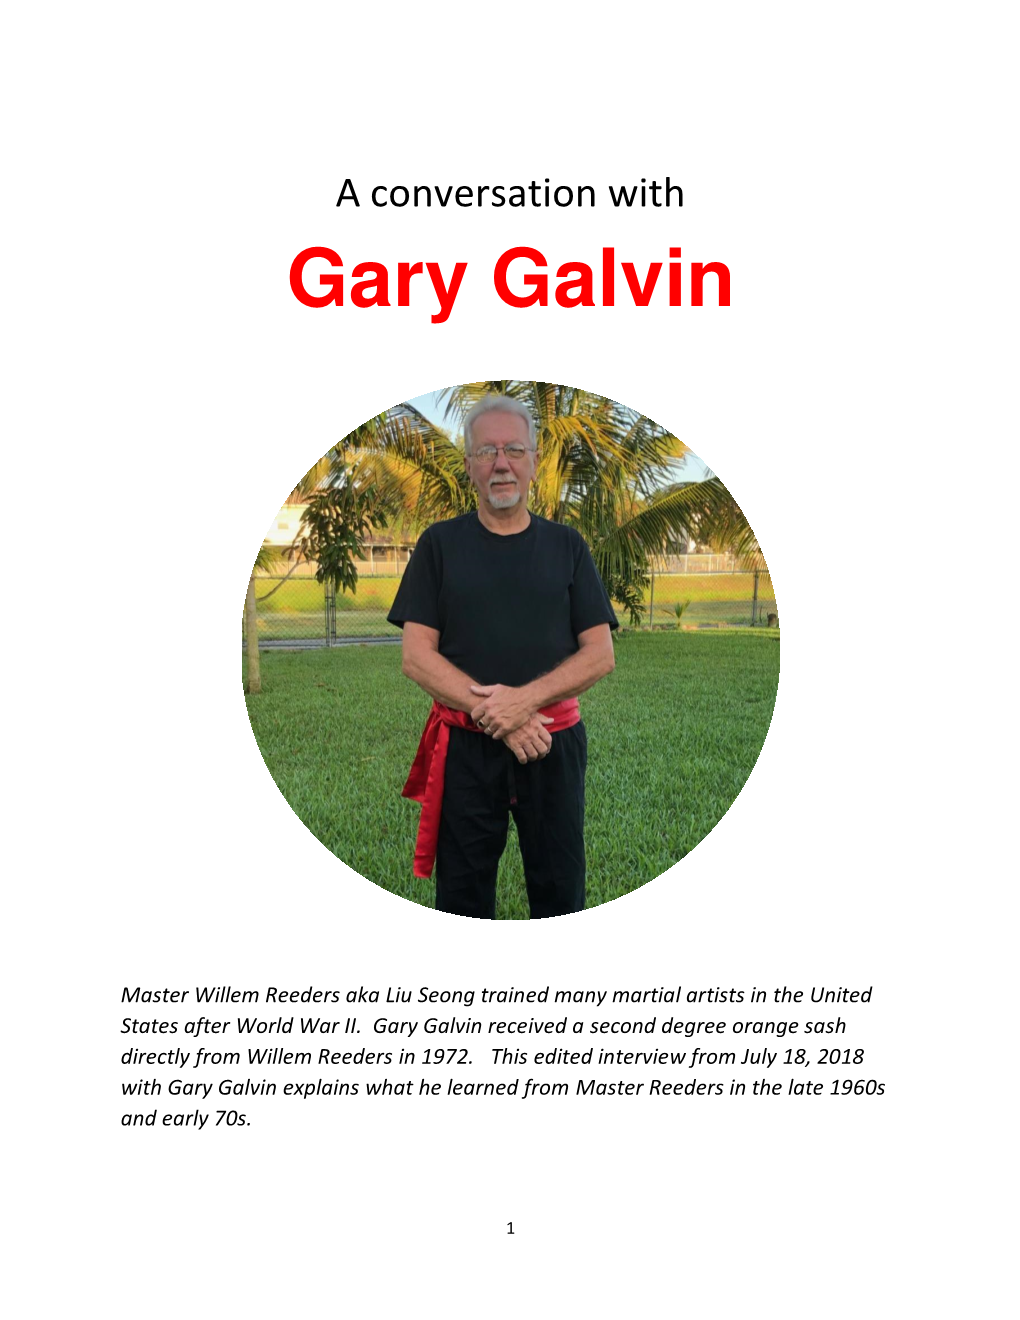 An Interview with Gary Galvin